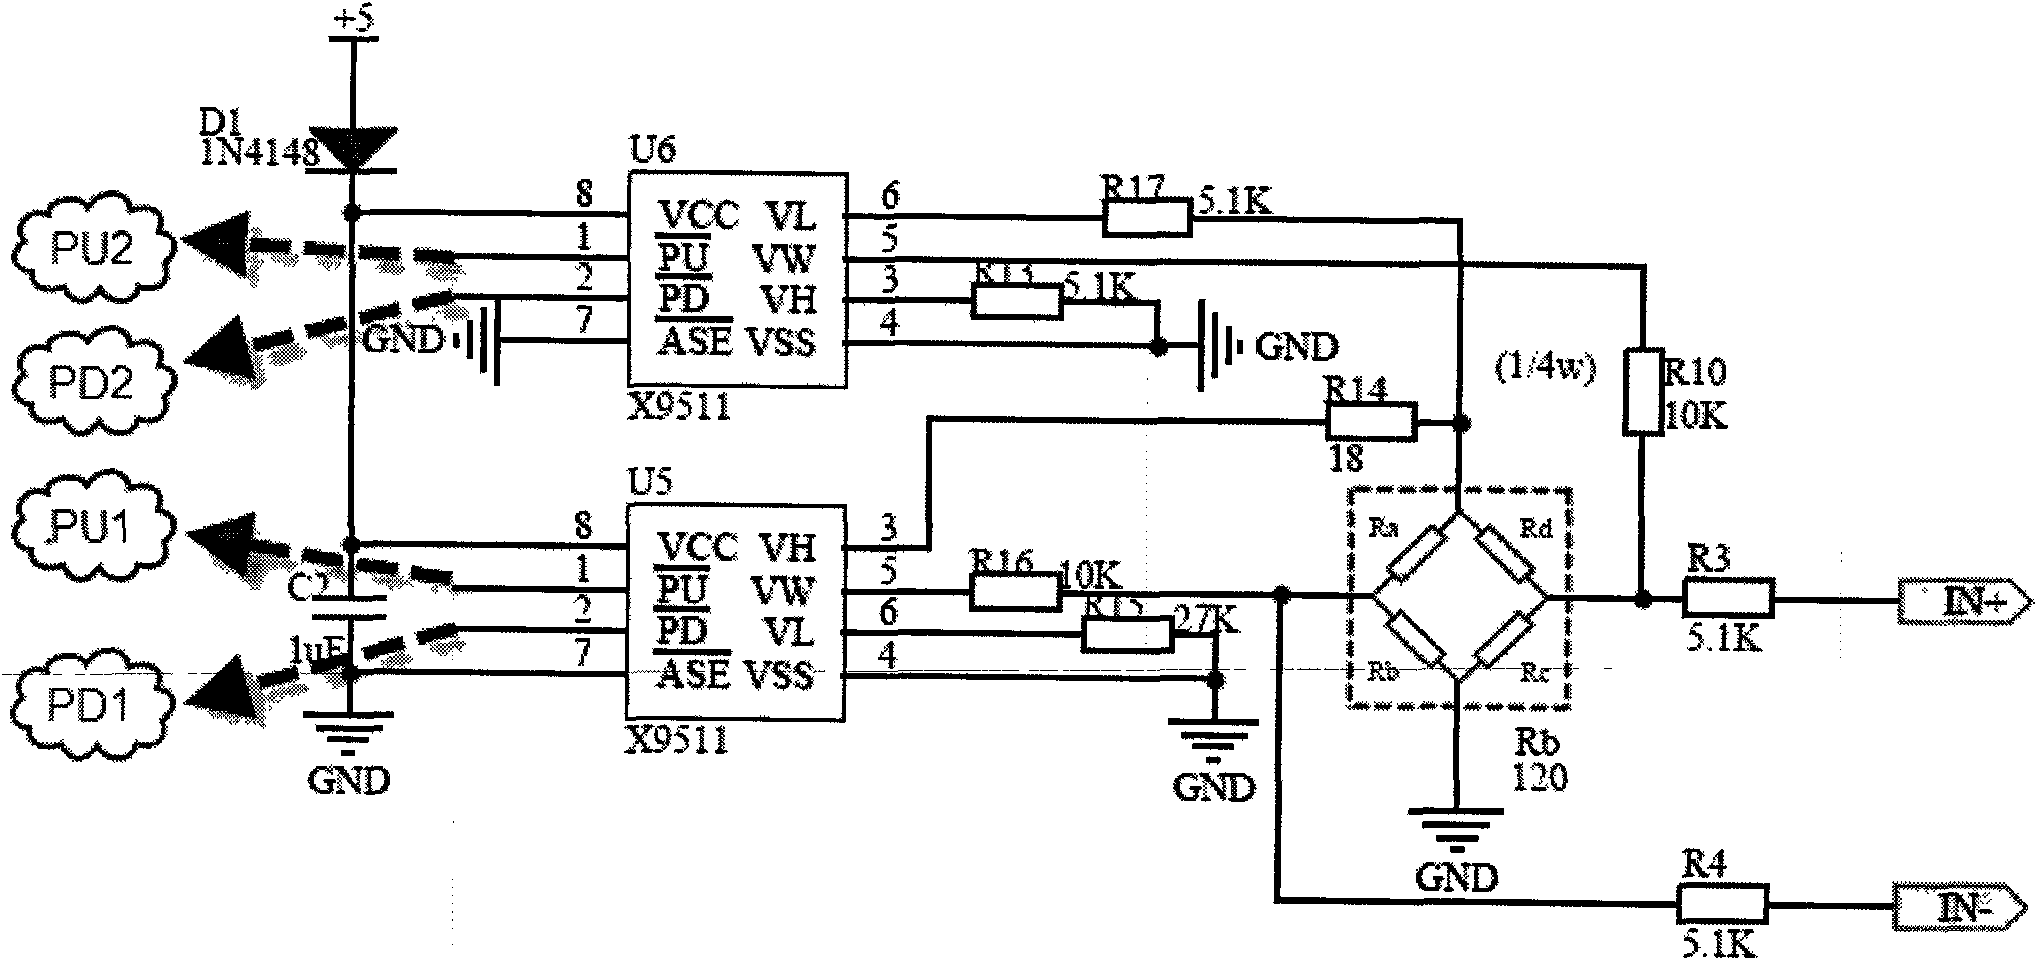 Remote zero setting circuit and method for resistance-type strain measurement